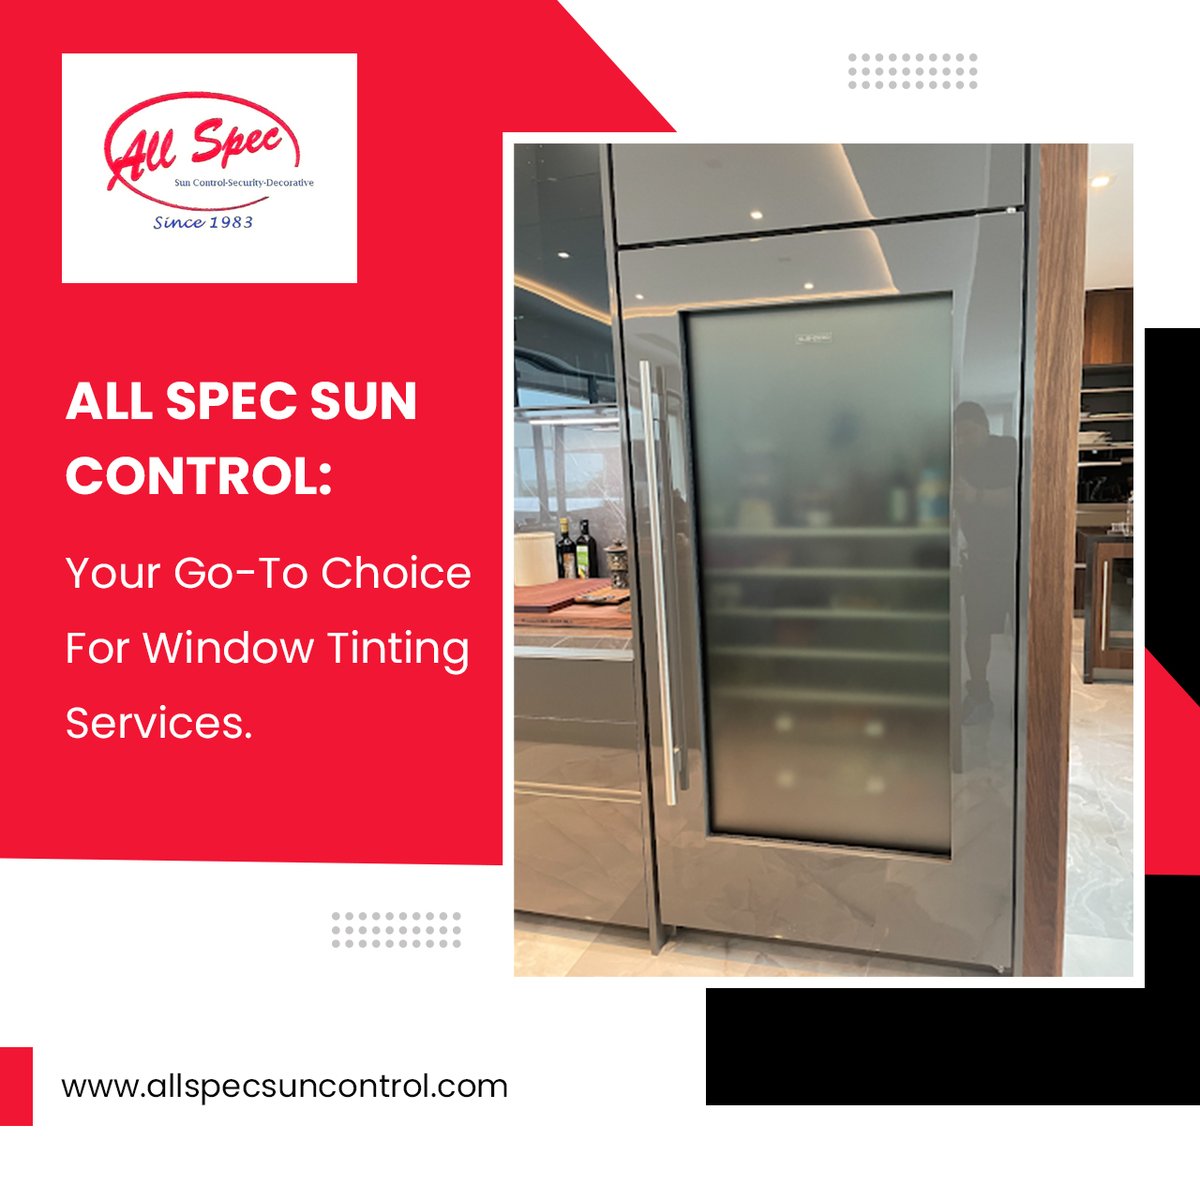 Tired of feeling exposed at home or work? All Spec Sun Control has got you covered with our top-of-the-line window tinting services. Contact us today to learn more.

#windowtinting #privacysolutions #suncontrol #homeimprovement #experttinting #highqualitymaterials